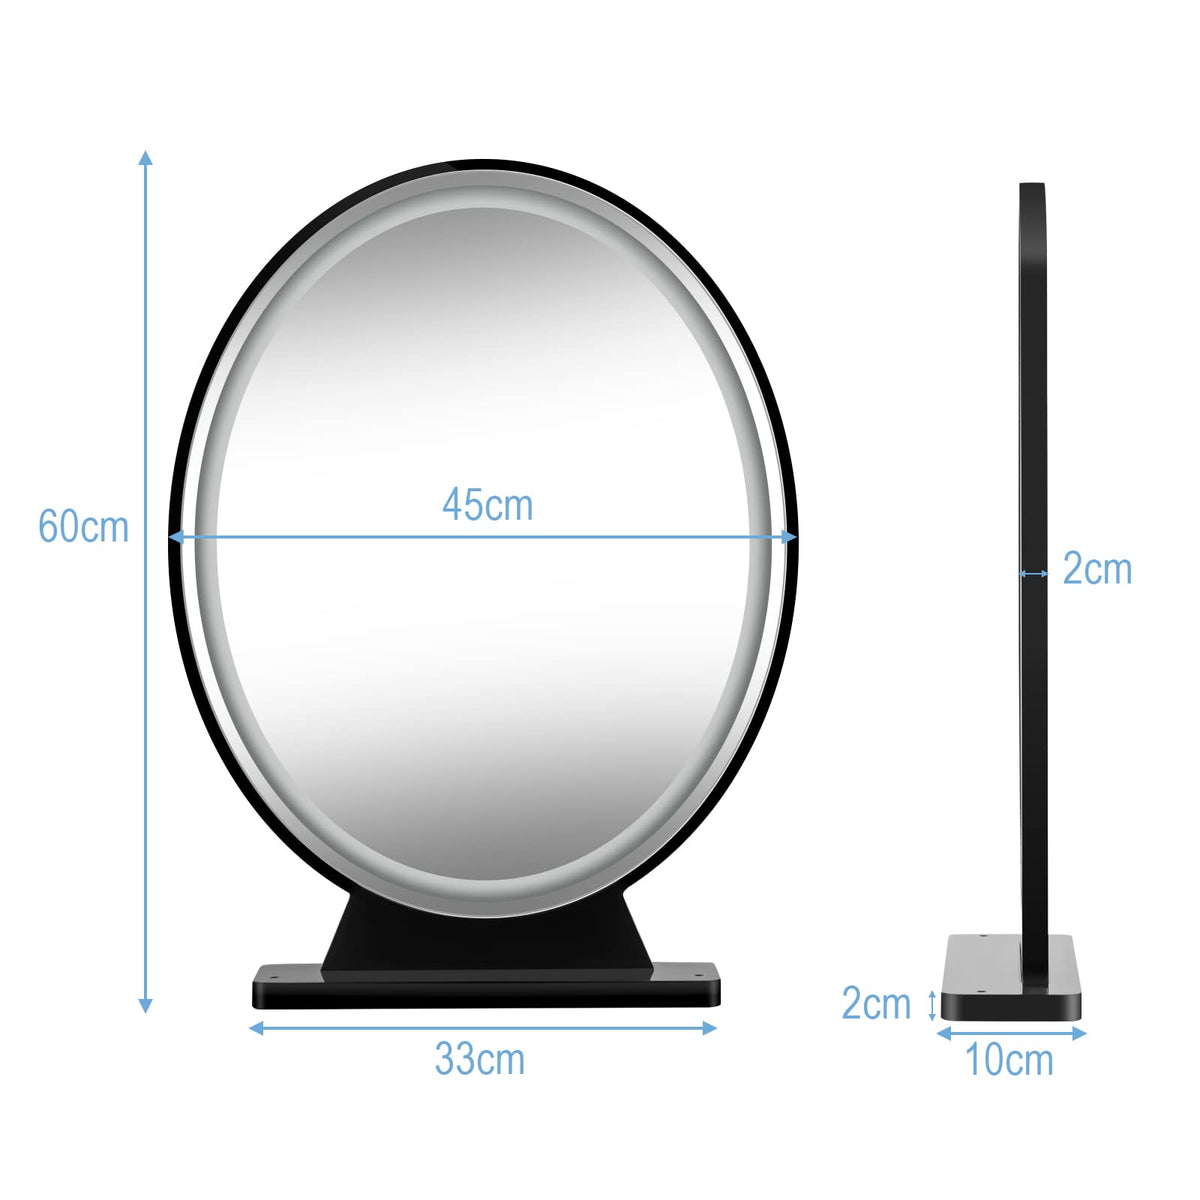 Giantex Large Round Lighted Vanity Makeup Mirror, Remote Control HD Mirror w/Lights, 4 Color Lighting Modes